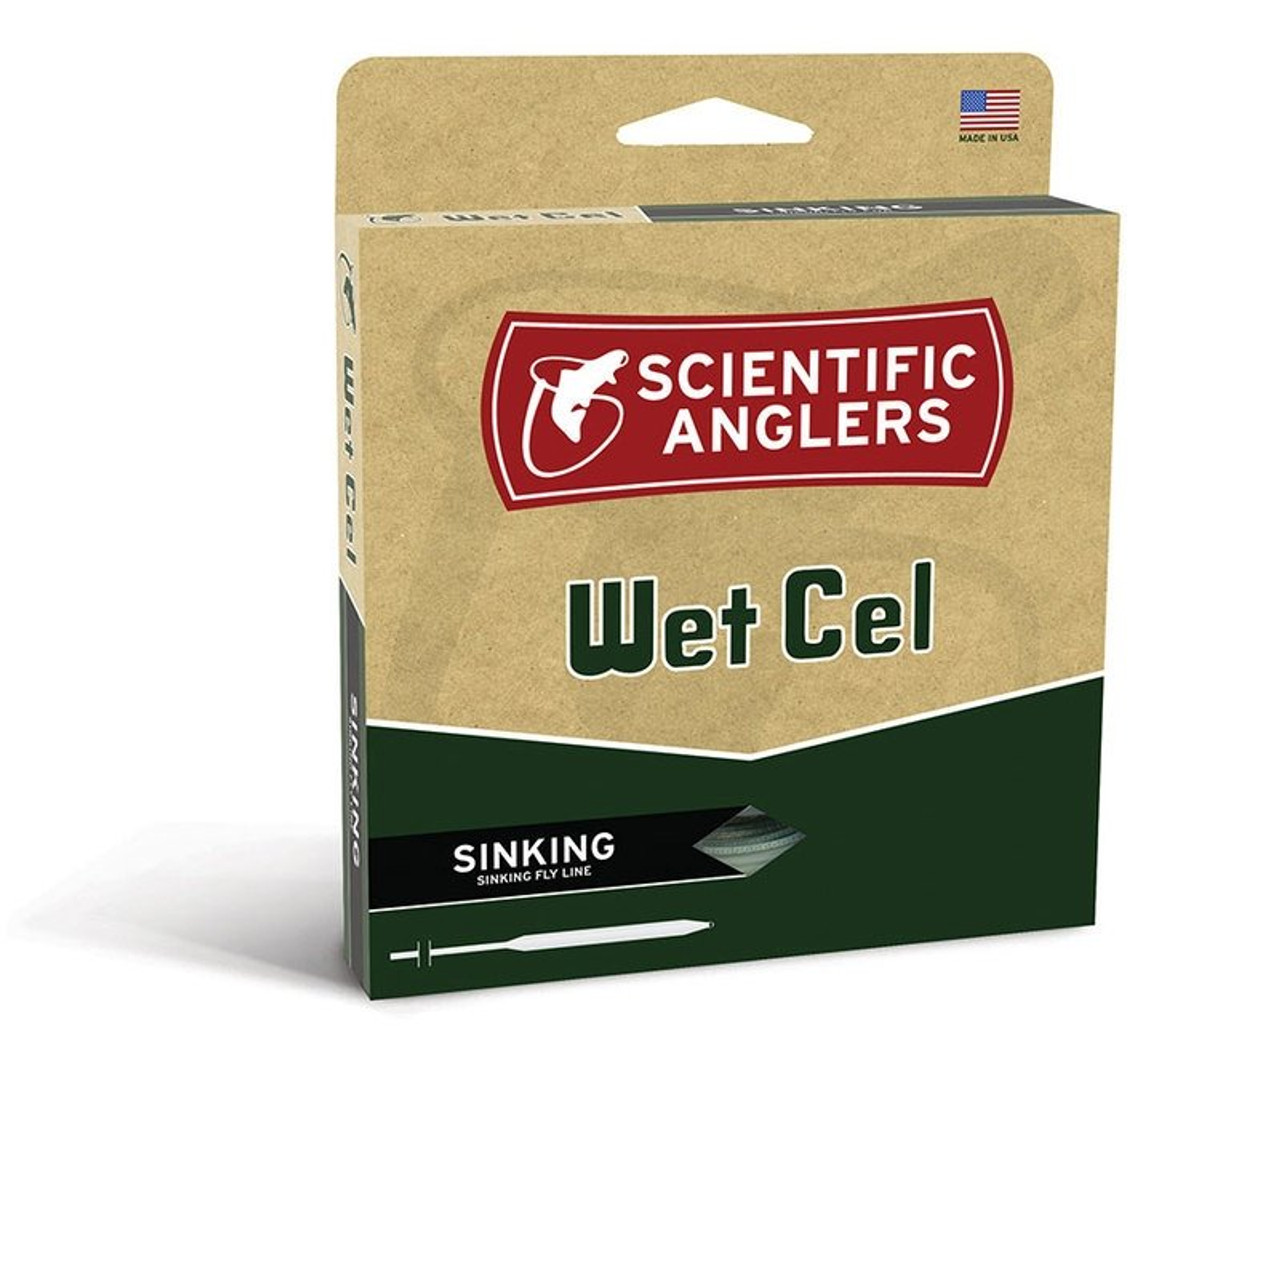 Scientific Anglers WetCel Fly Lines